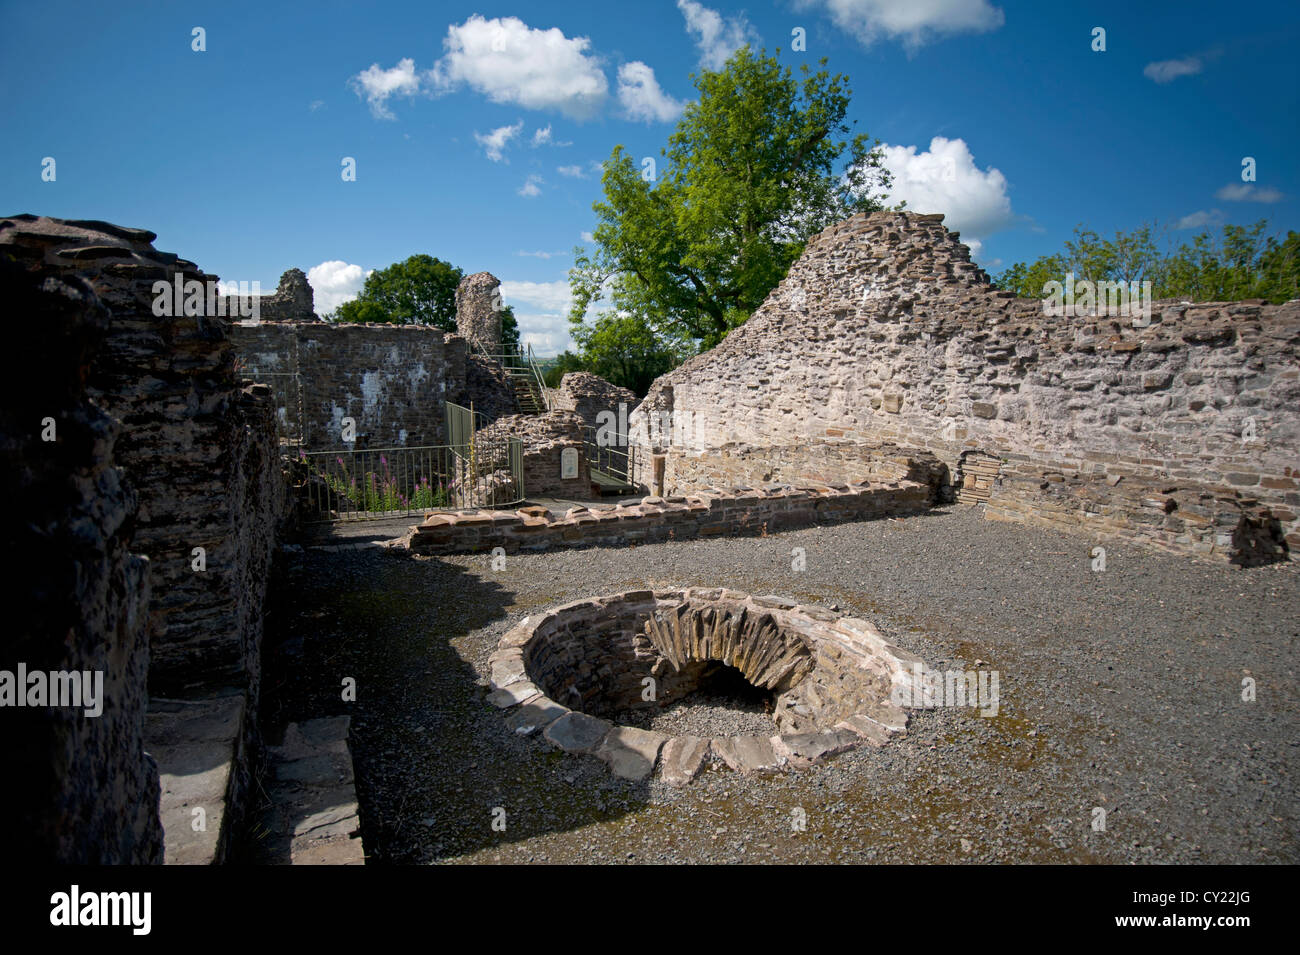 Dolforwyn Castle, recently excavated ruins in Powys, Montgomeryshire. Mid Wales.  SCO 8705 Stock Photo